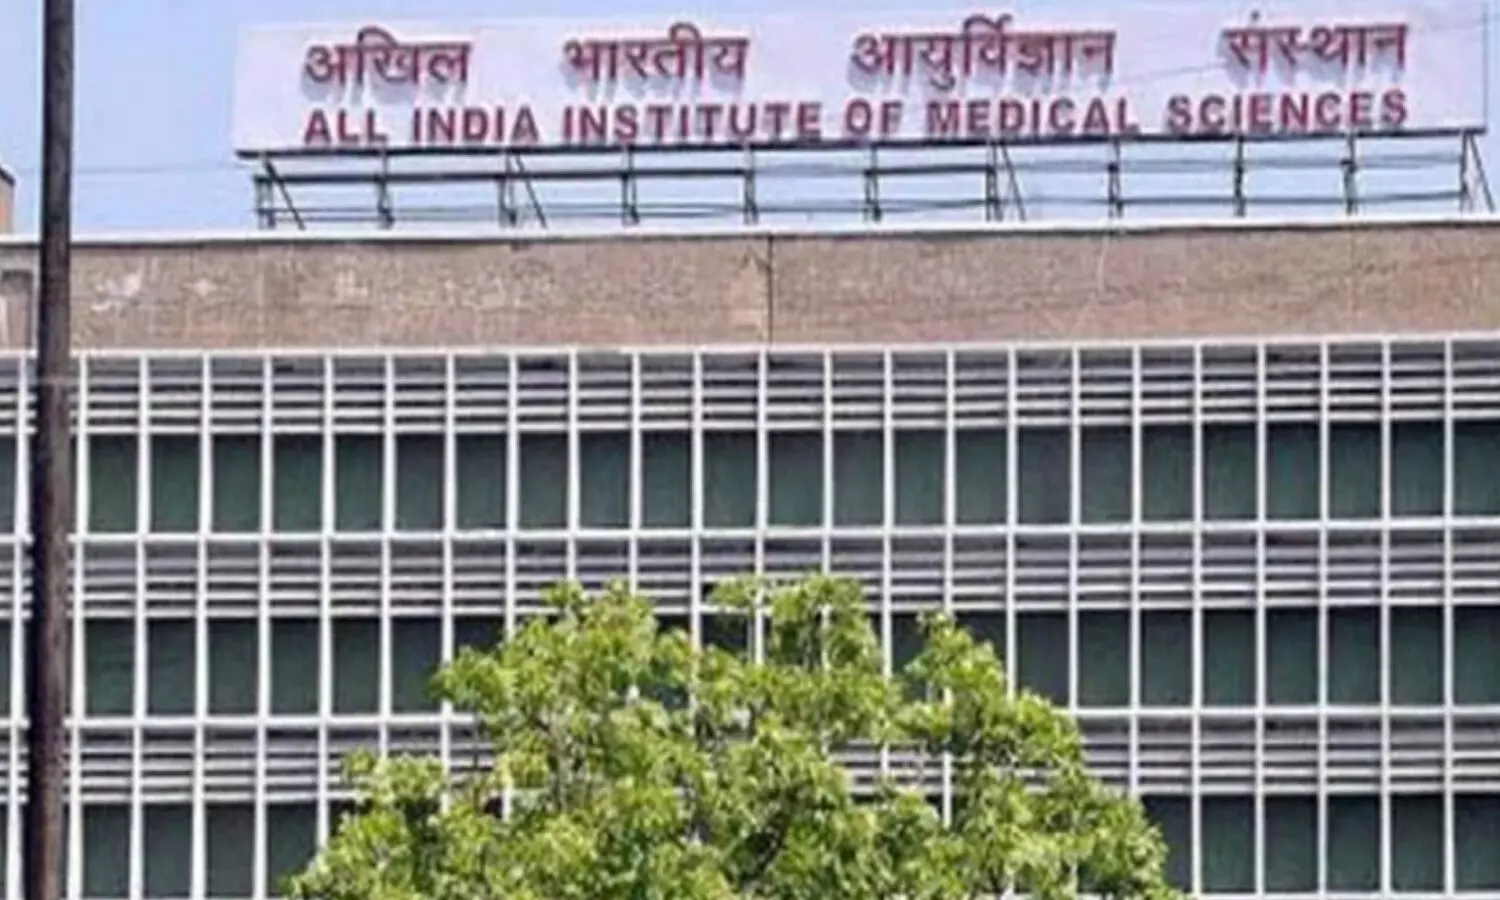 AIIMS PhD Programme July 2021: Registration process begins, View application Details here